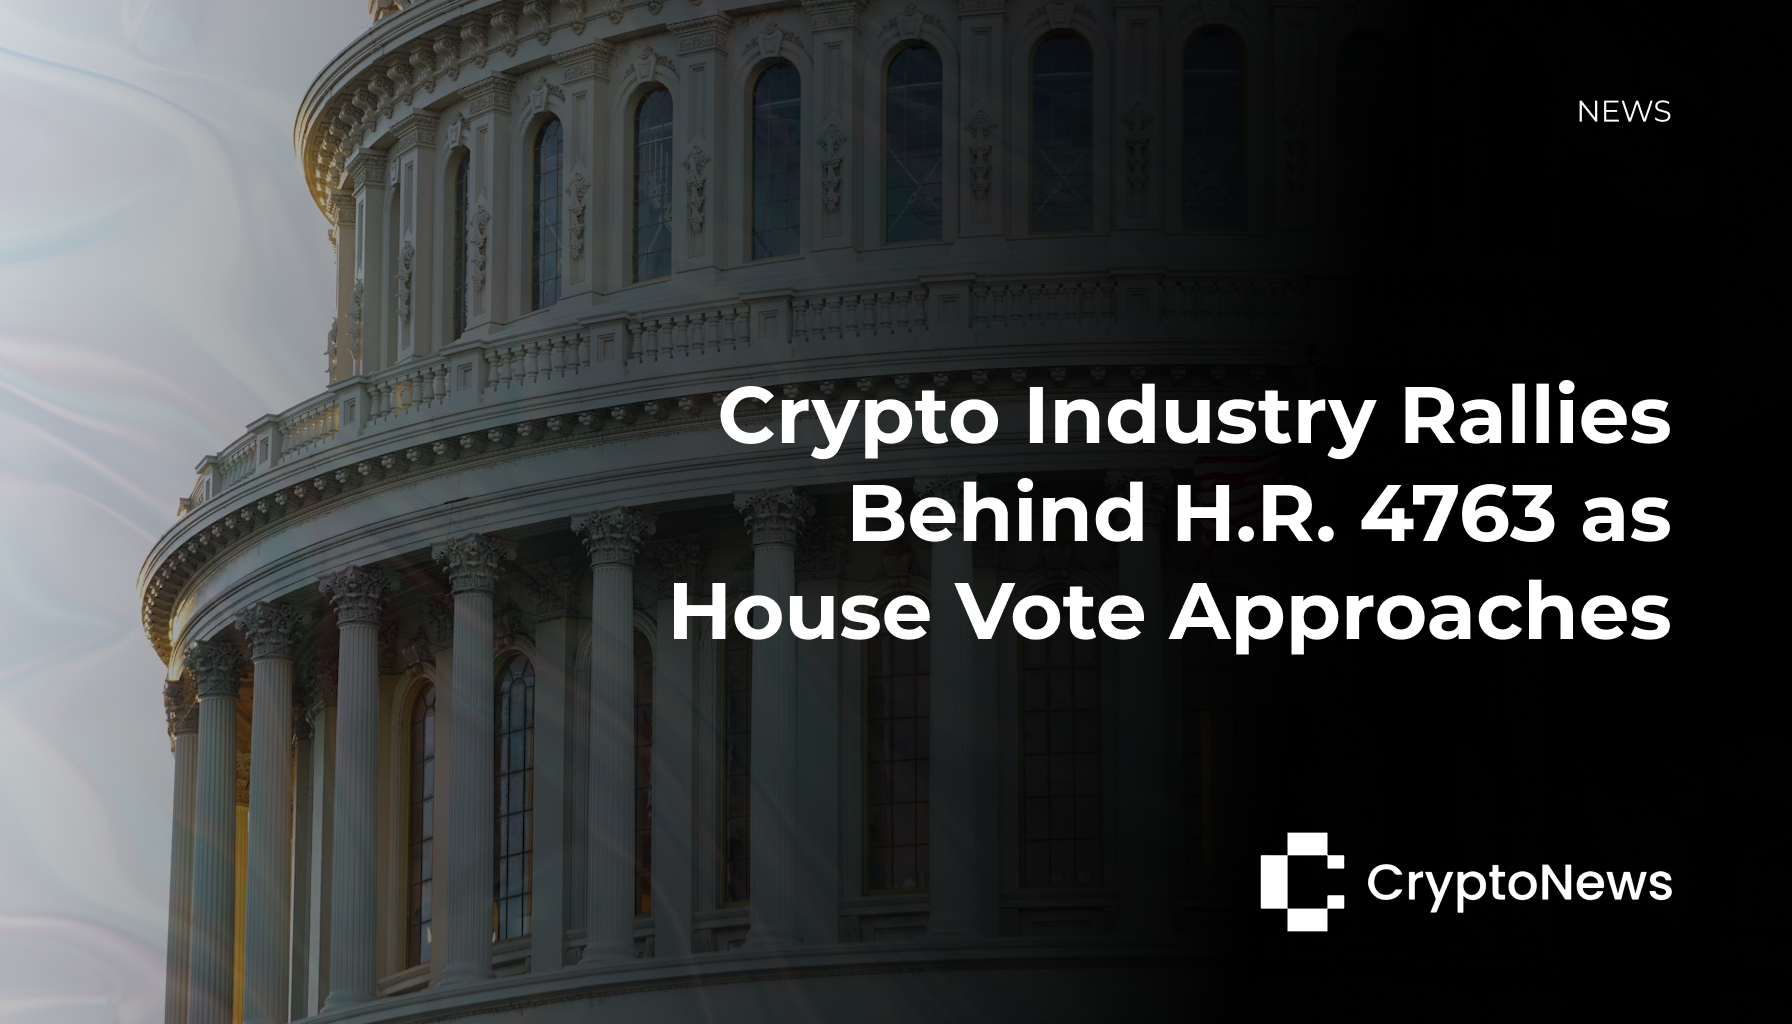 U.S. Capitol building with headline: Crypto Industry Rallies Behind H.R. 4763 as House Vote Approaches - CryptoNews